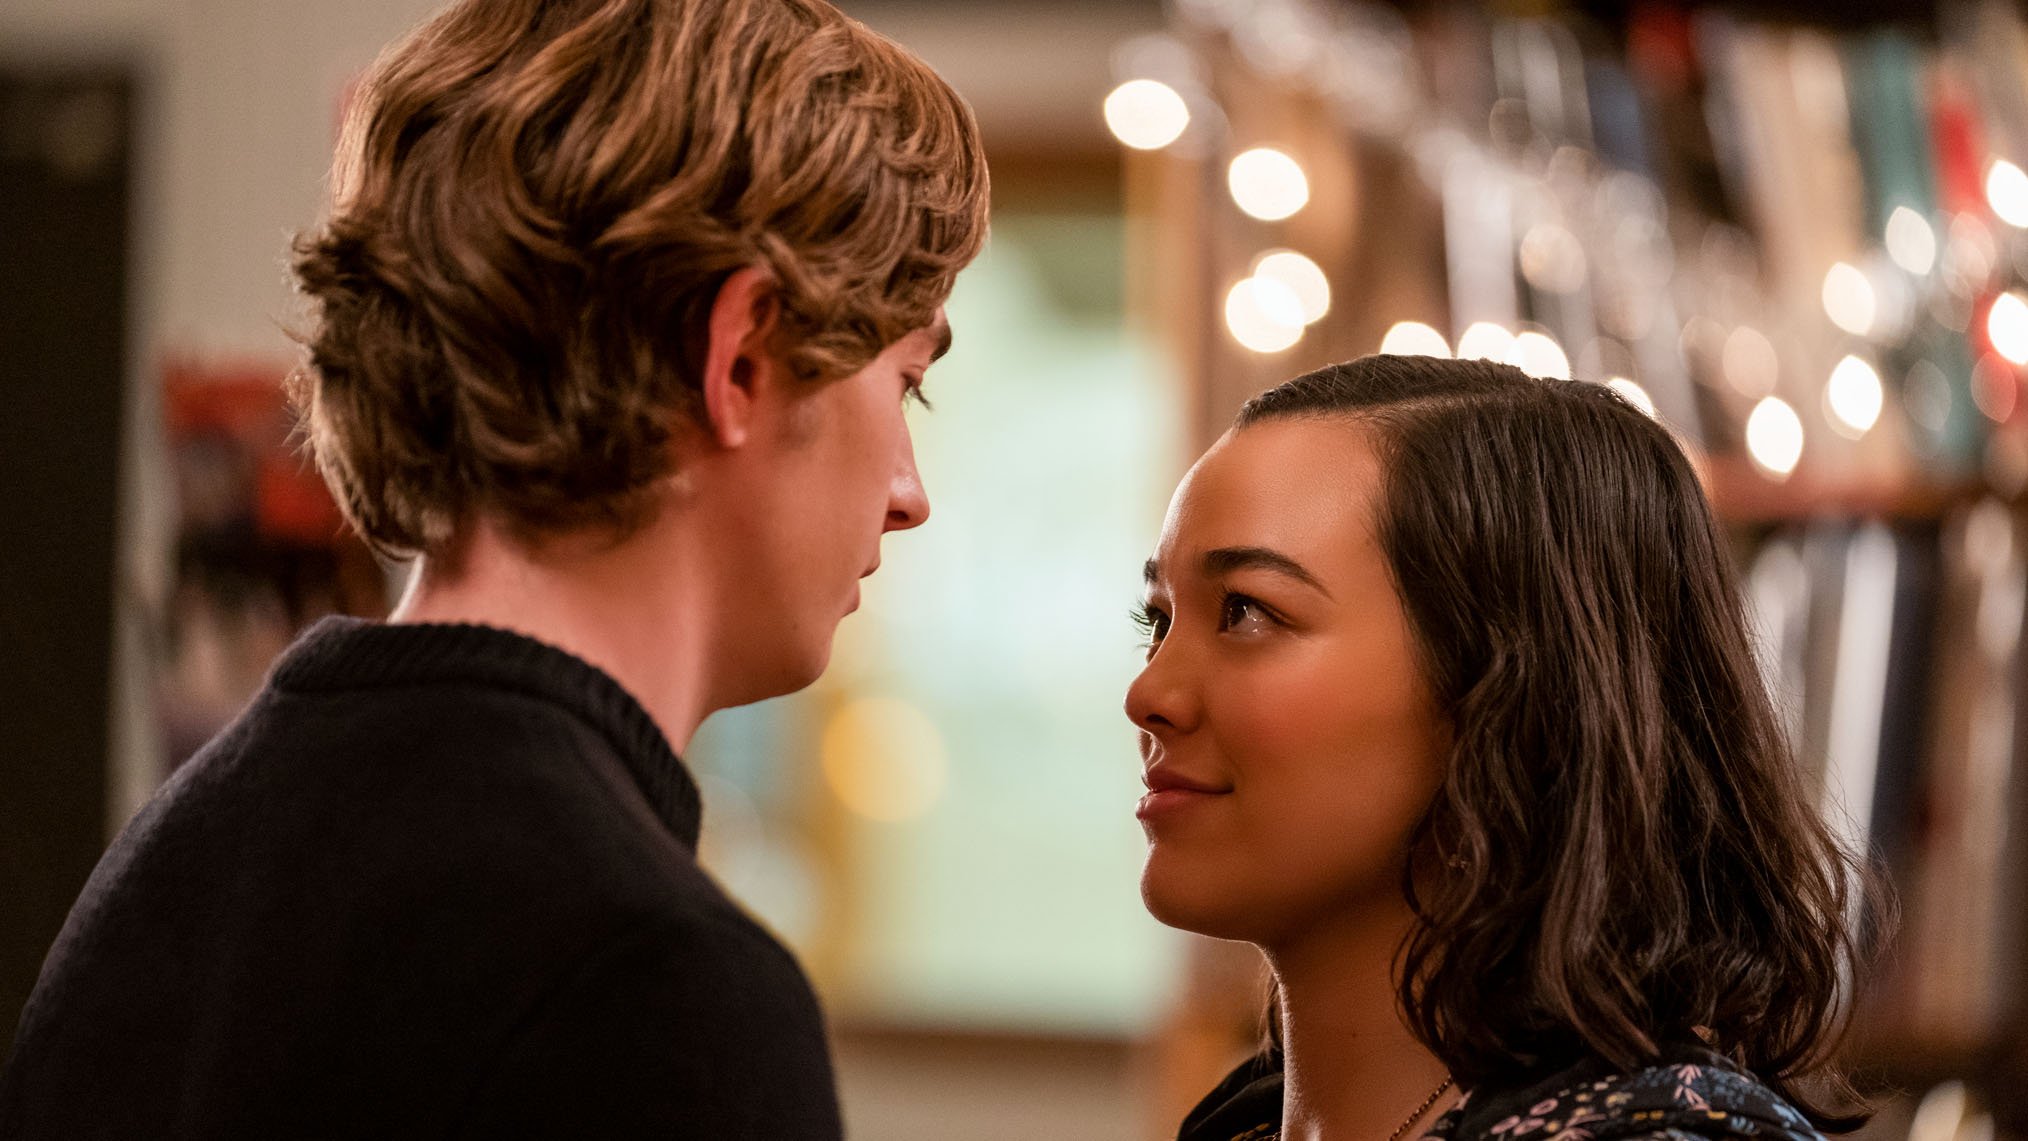 Dash (Austin Abrams) looks affectionately at Lily (Midori Frances) in the Netflix rom-com series ‘Dash & Lily’